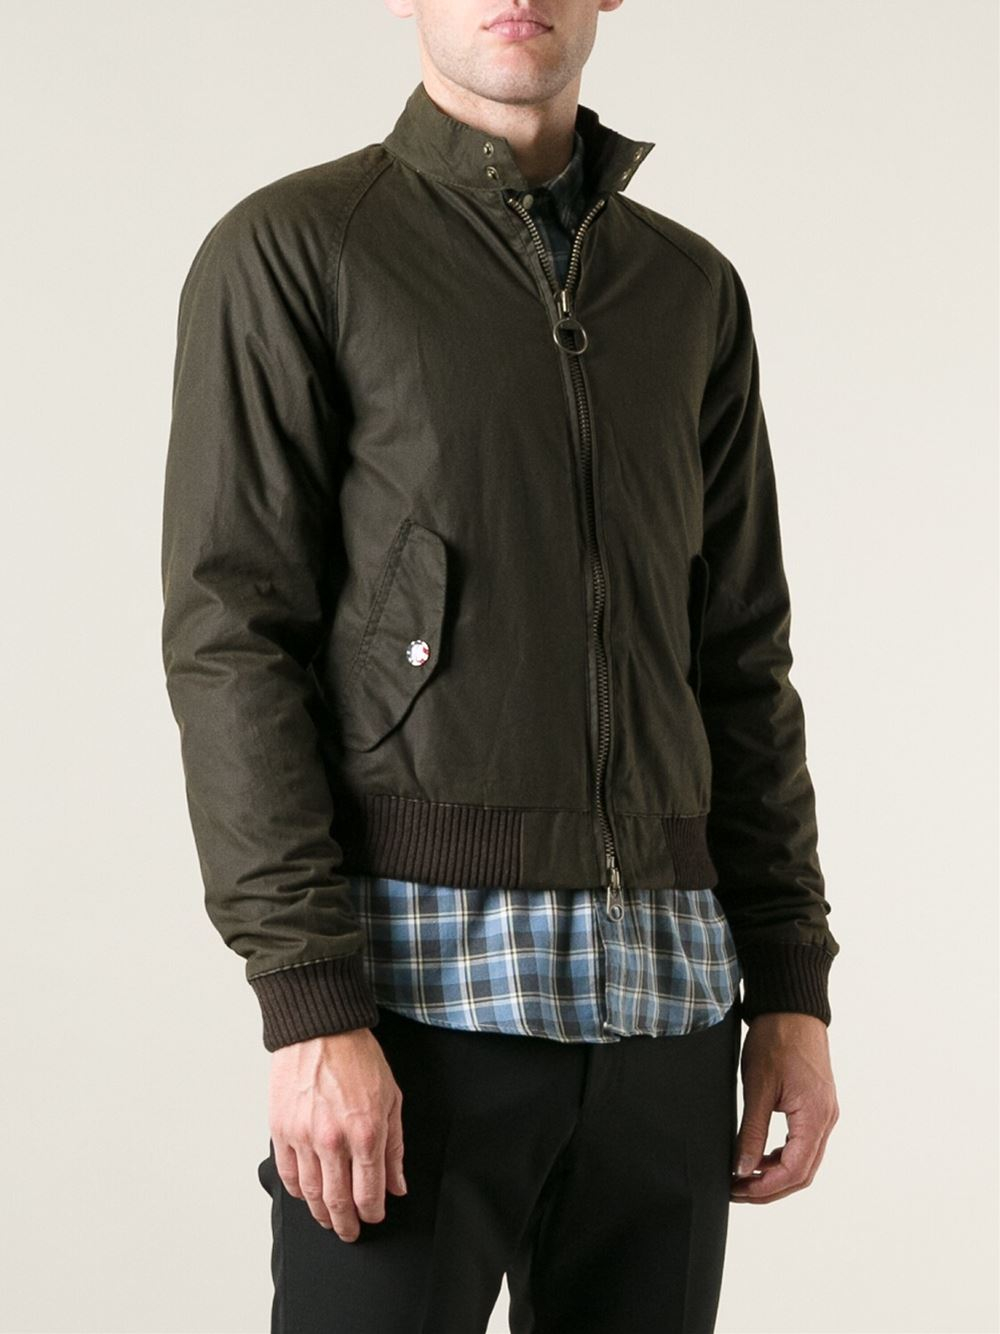 Lyst - Barbour Waxed Bomber Jacket in Green for Men